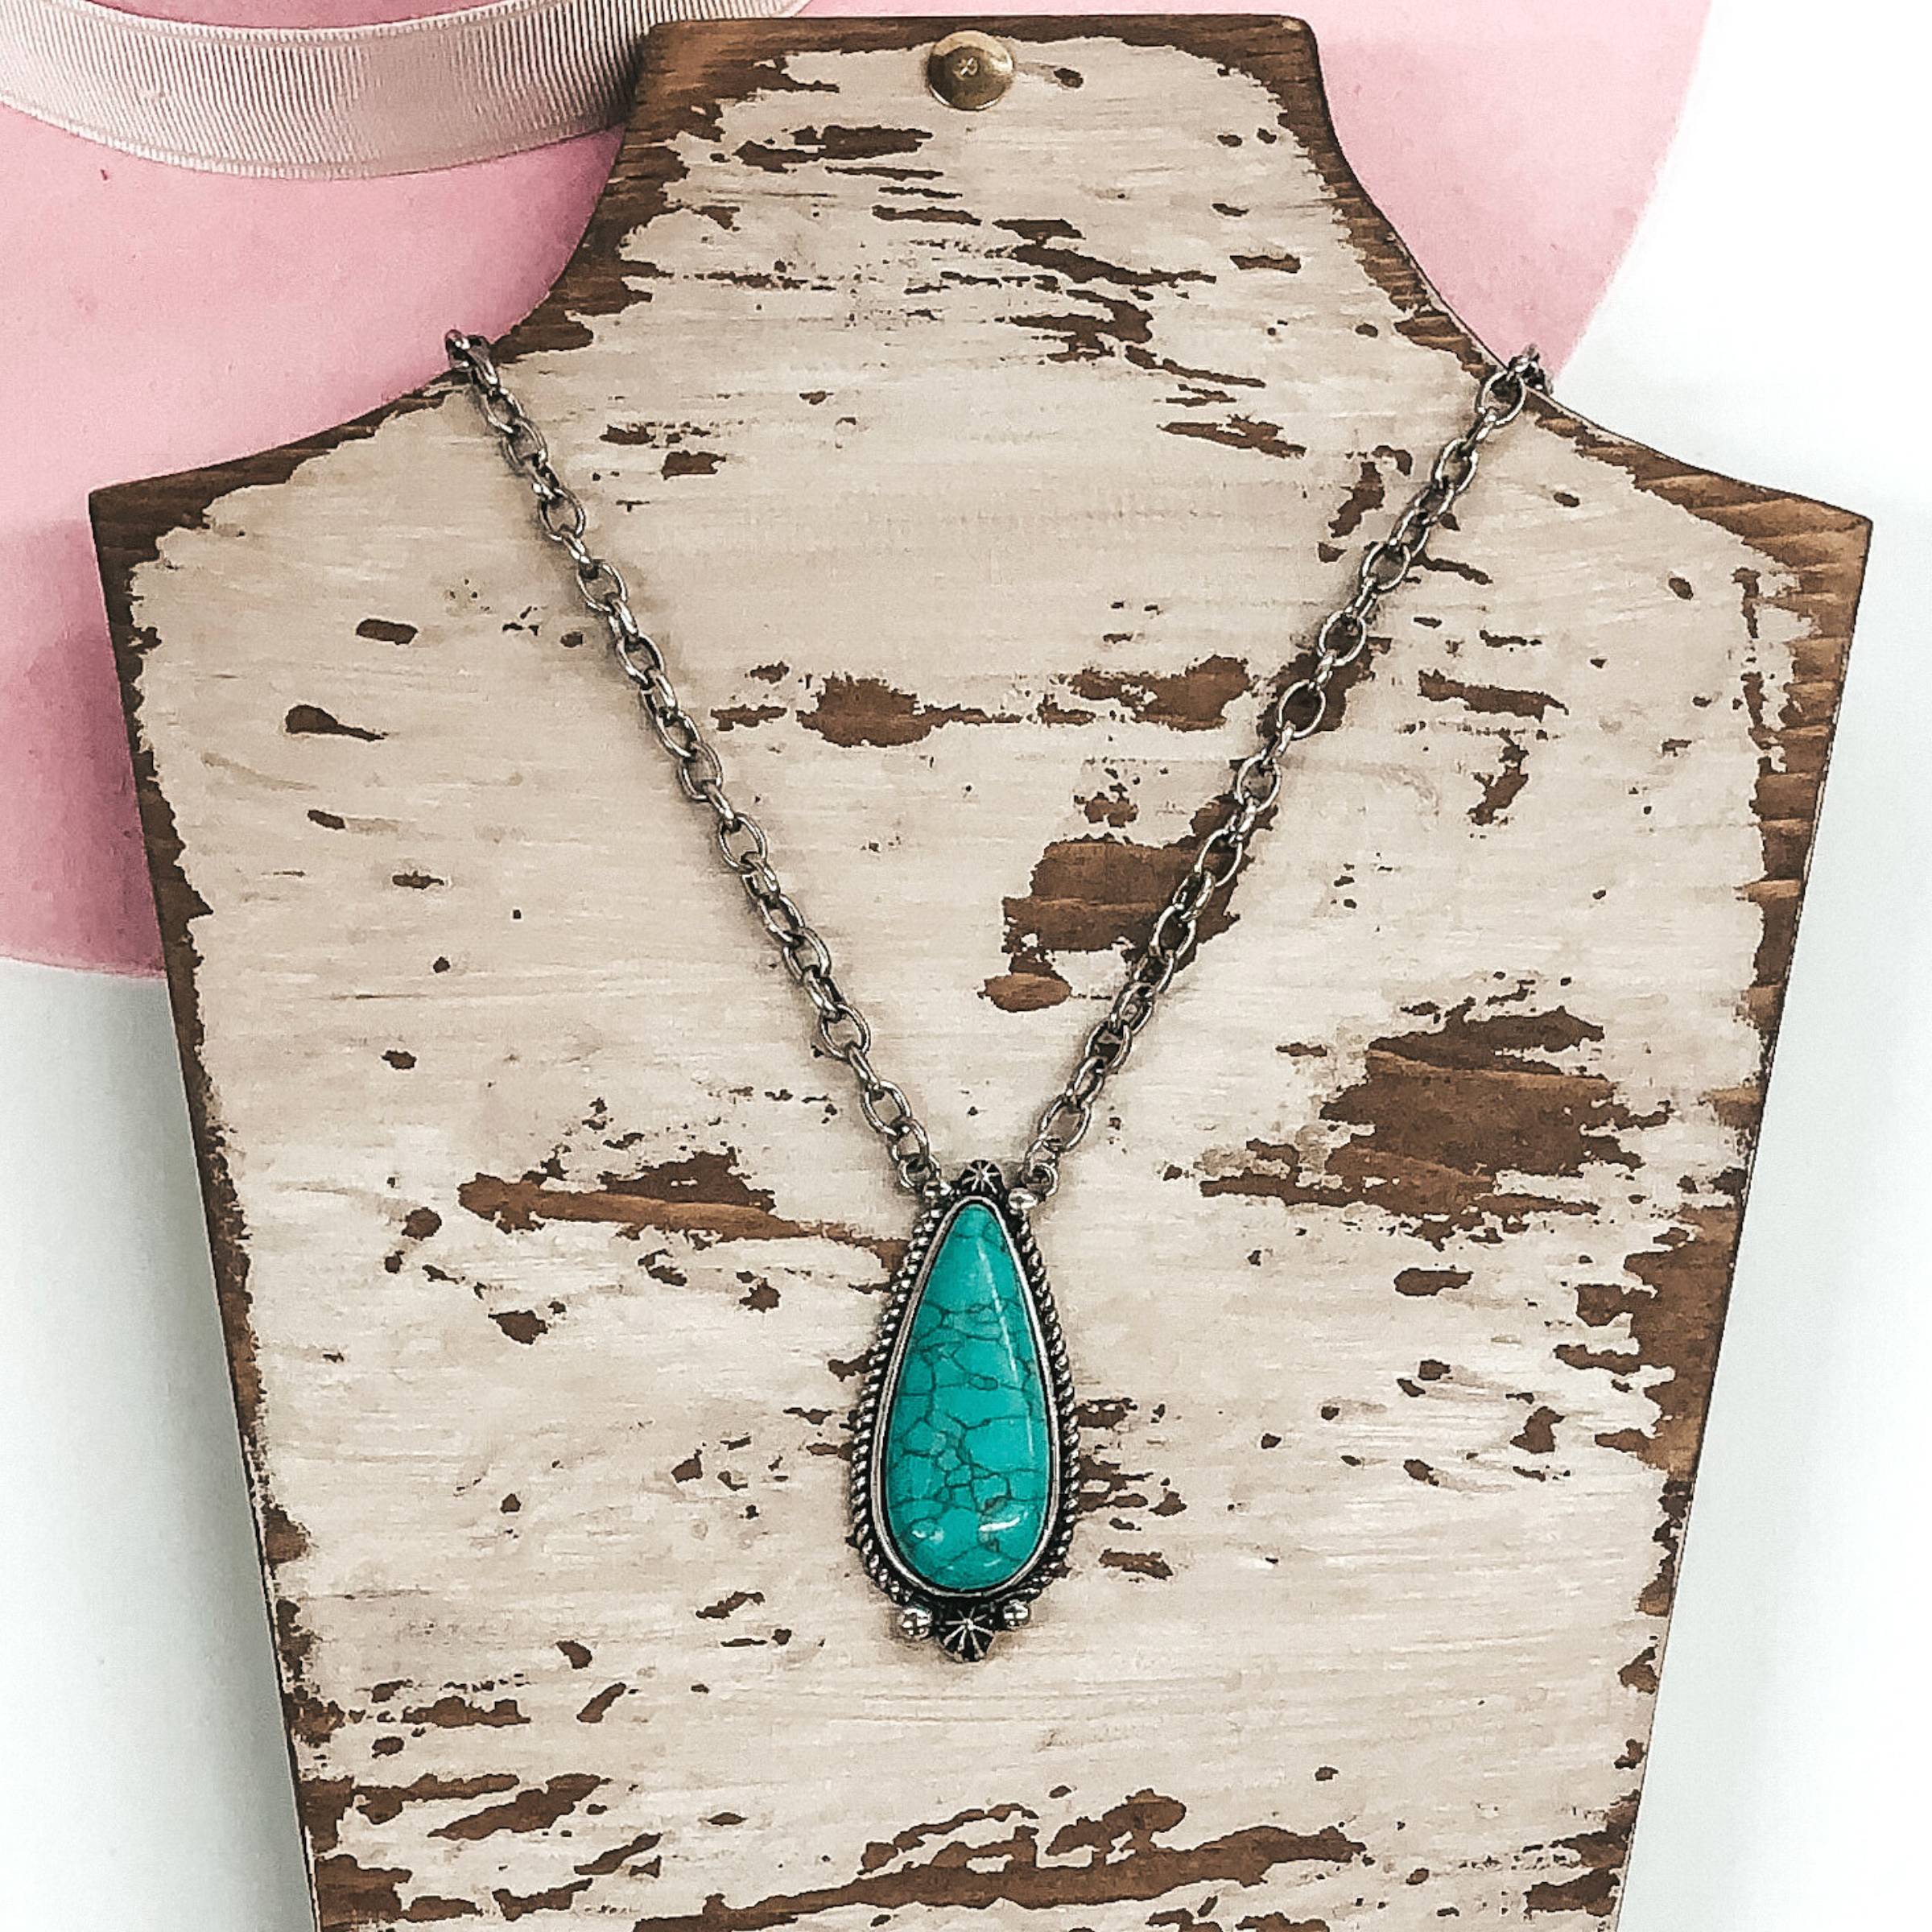 Western Silver Tone Chain Necklace with Teardrop Pendant in Turquoise - Giddy Up Glamour Boutique